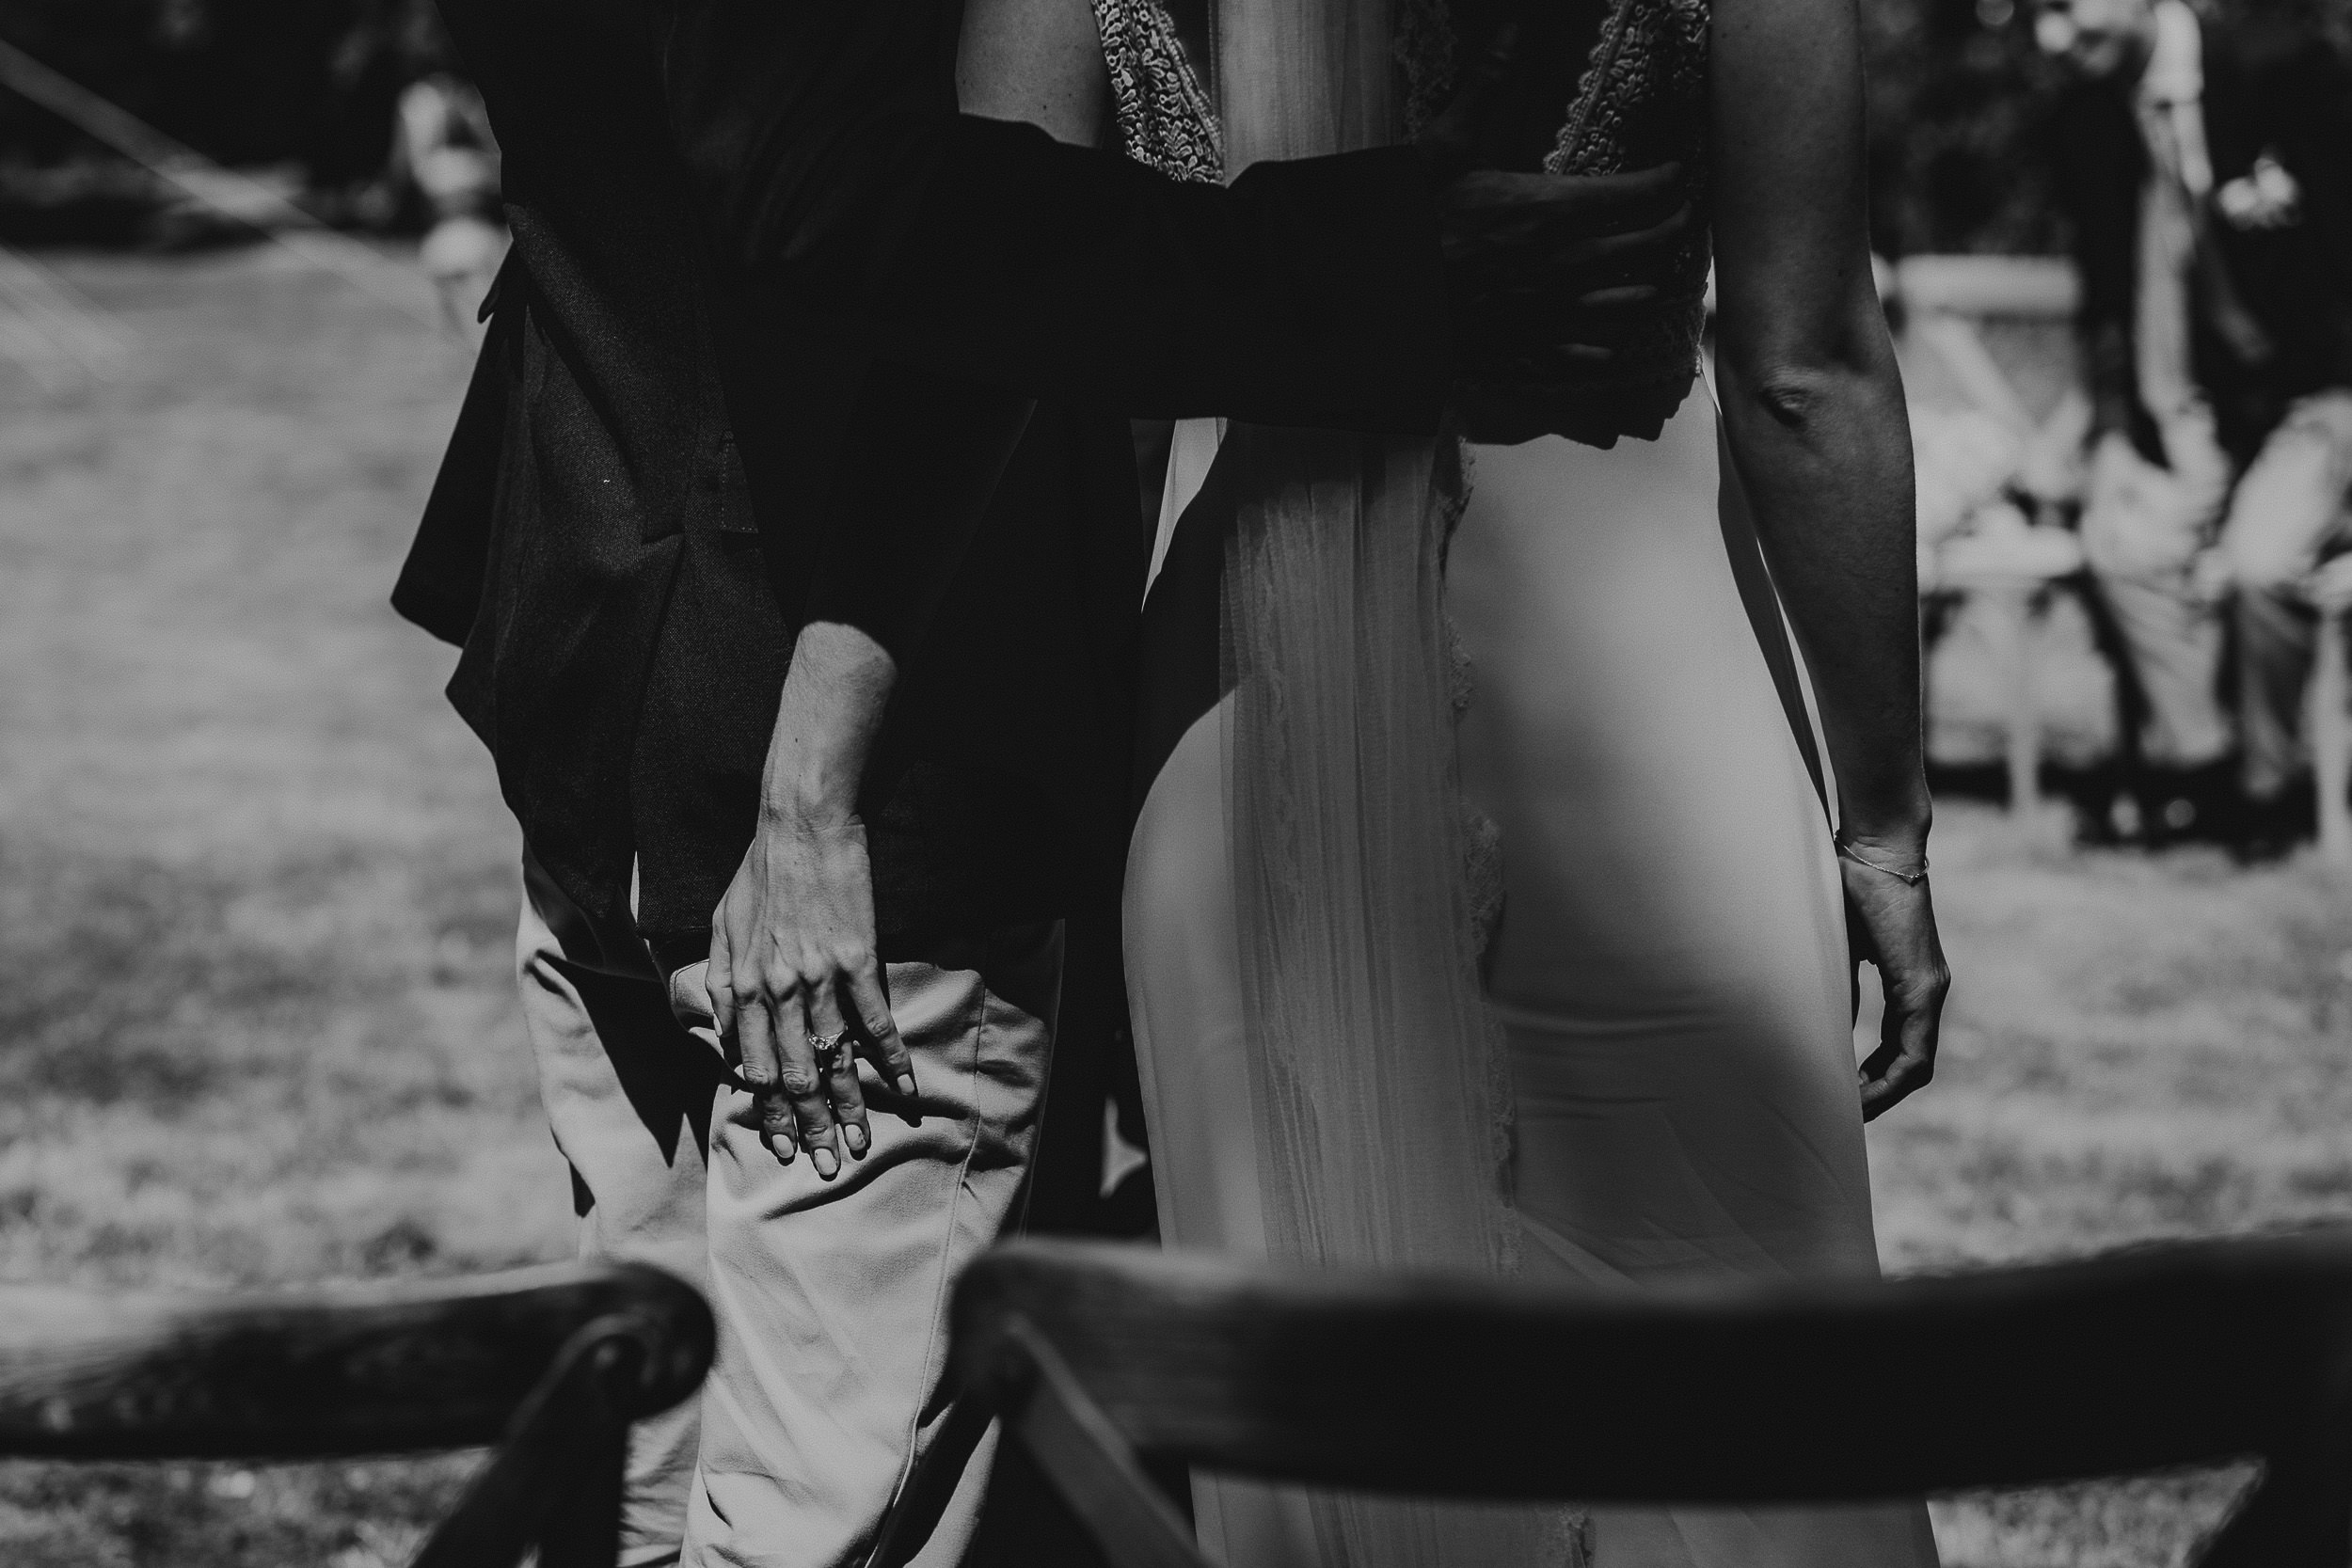 A wedding photographer captured a heartfelt moment of a bride and groom embracing in their black and white photo.